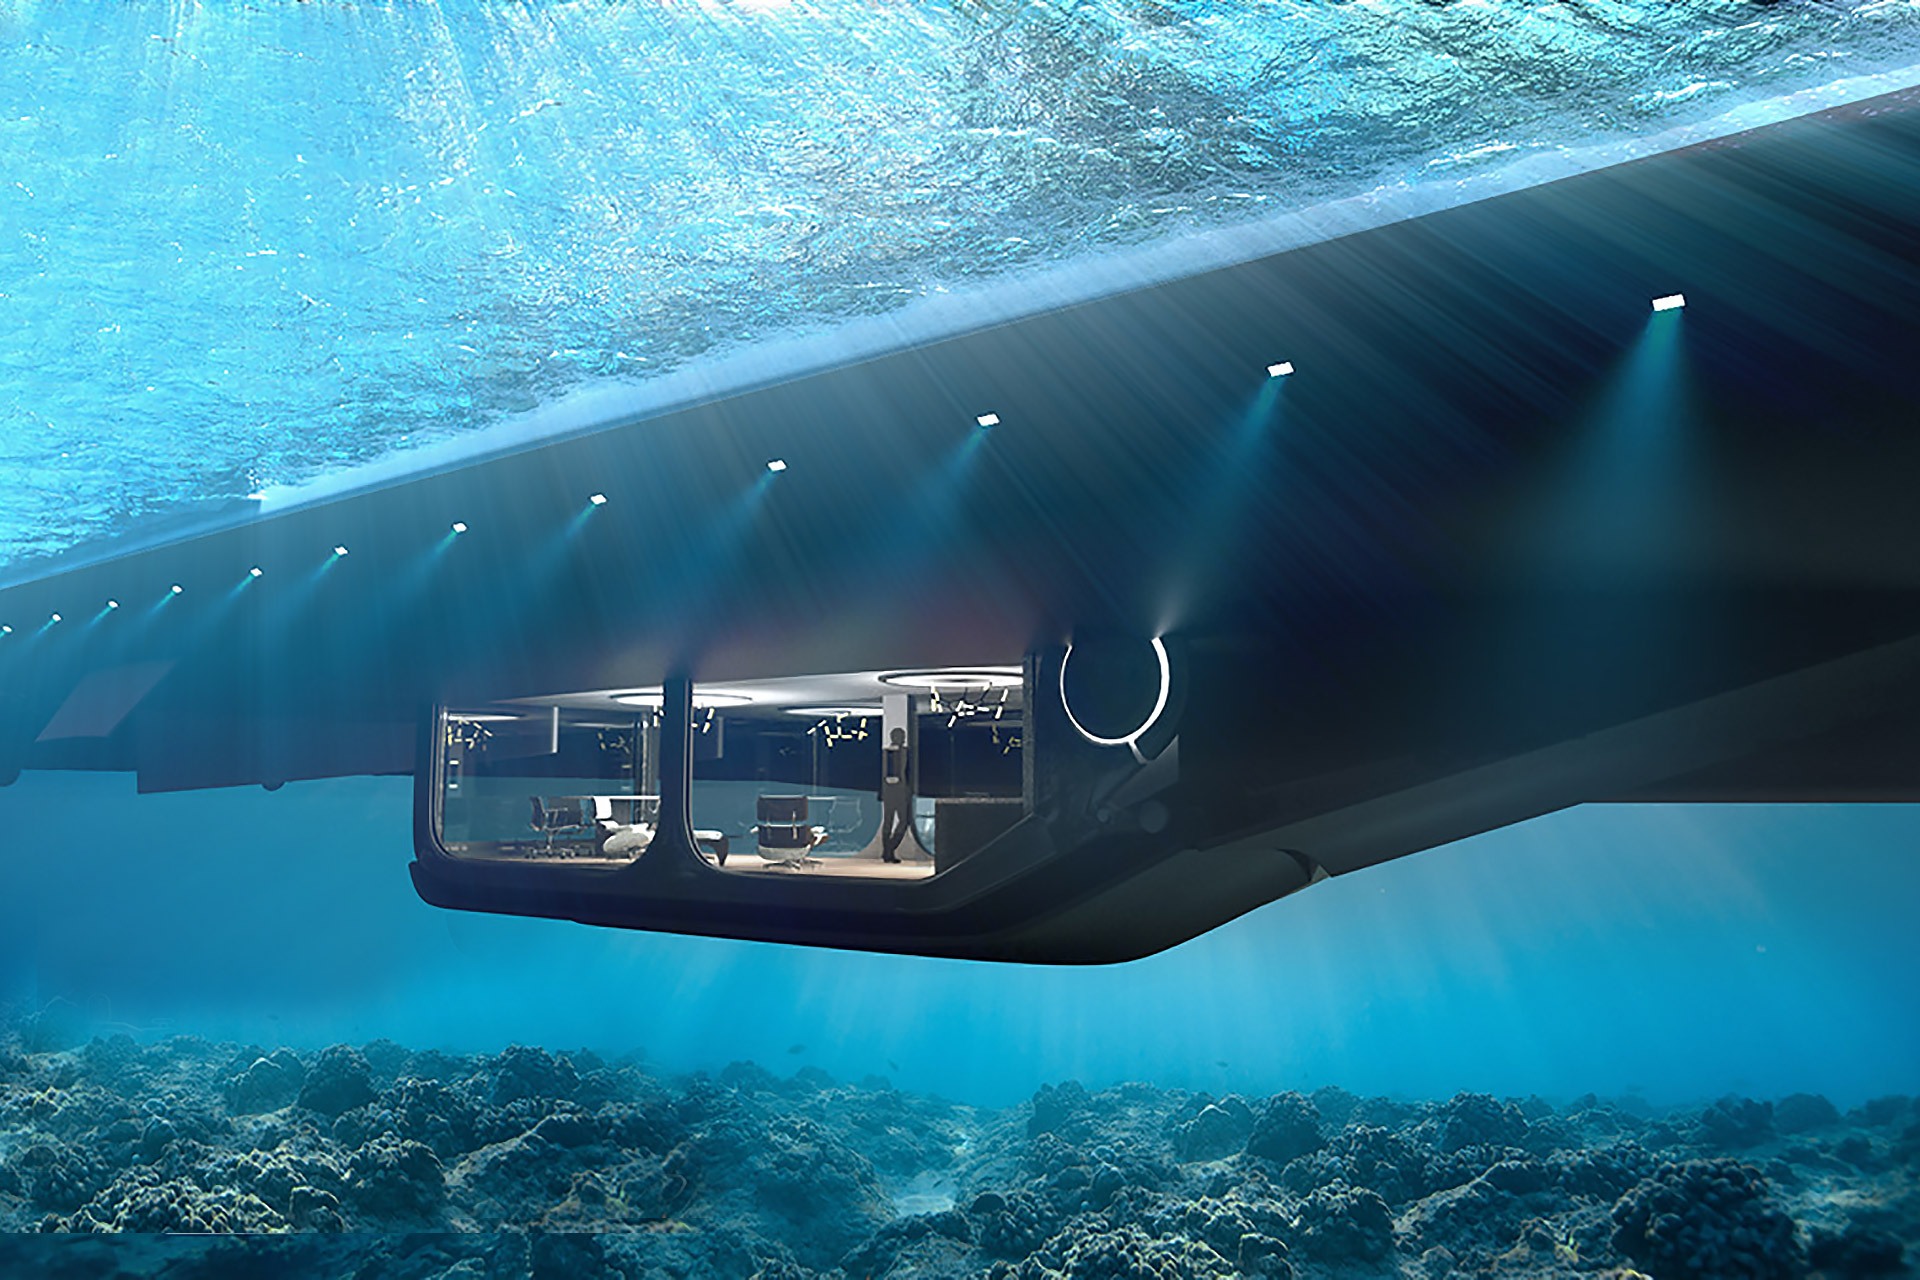 Cantharus Superyacht Concept | Uncrate, #Cantharus #Superyacht #Concept #Uncrate